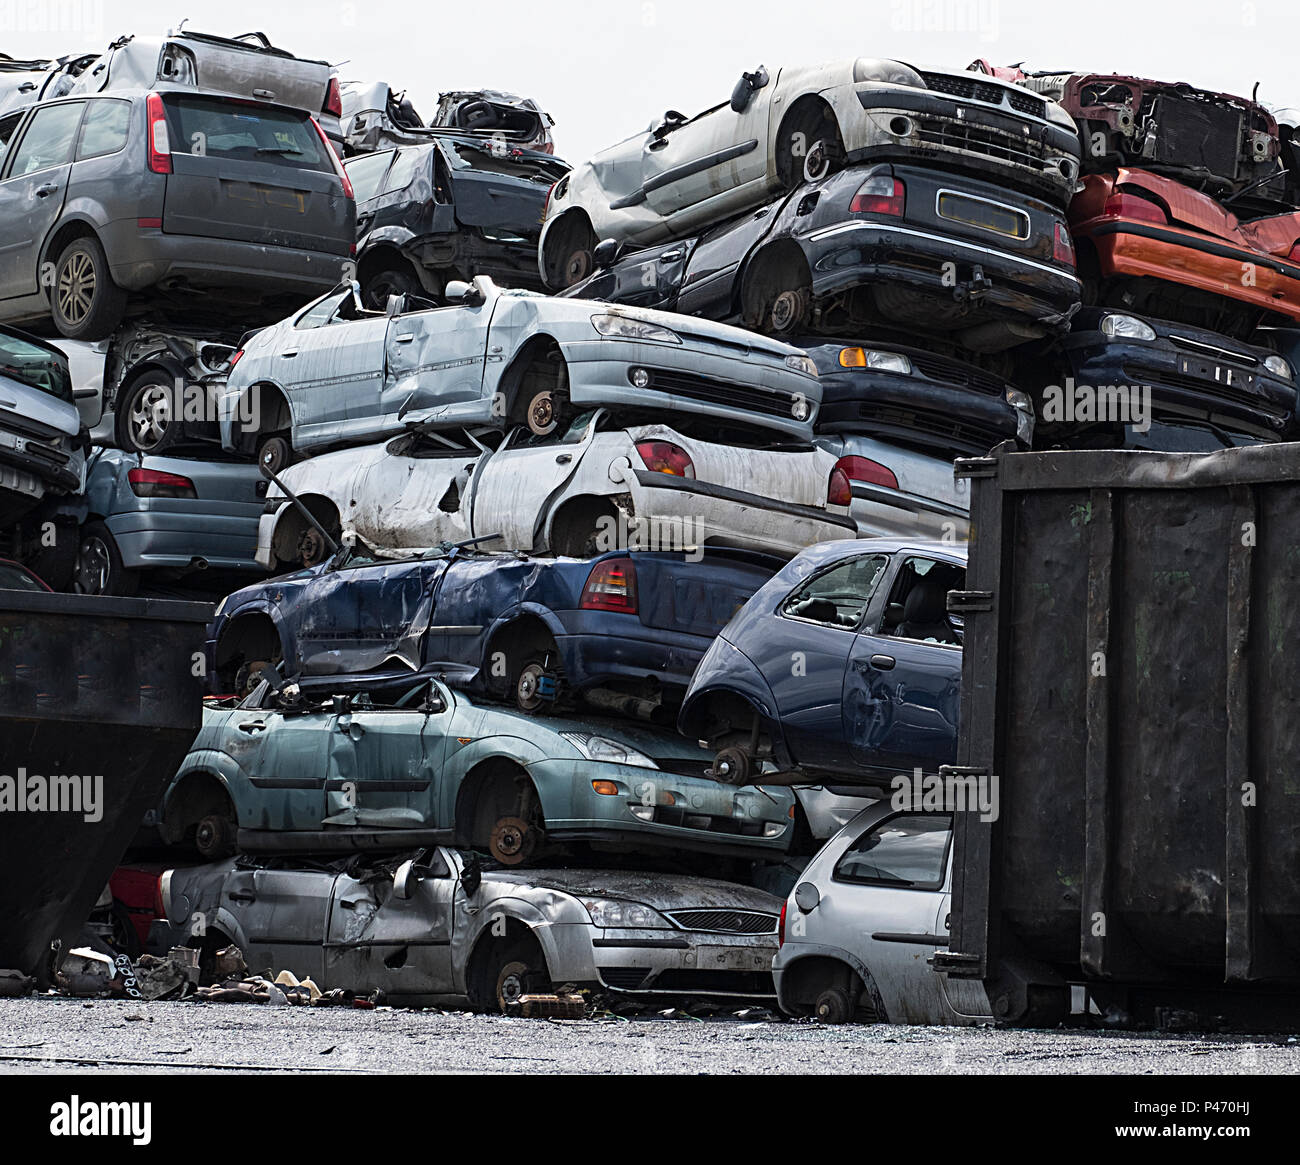 Scrapyard with car bodies piled up Stock Photo